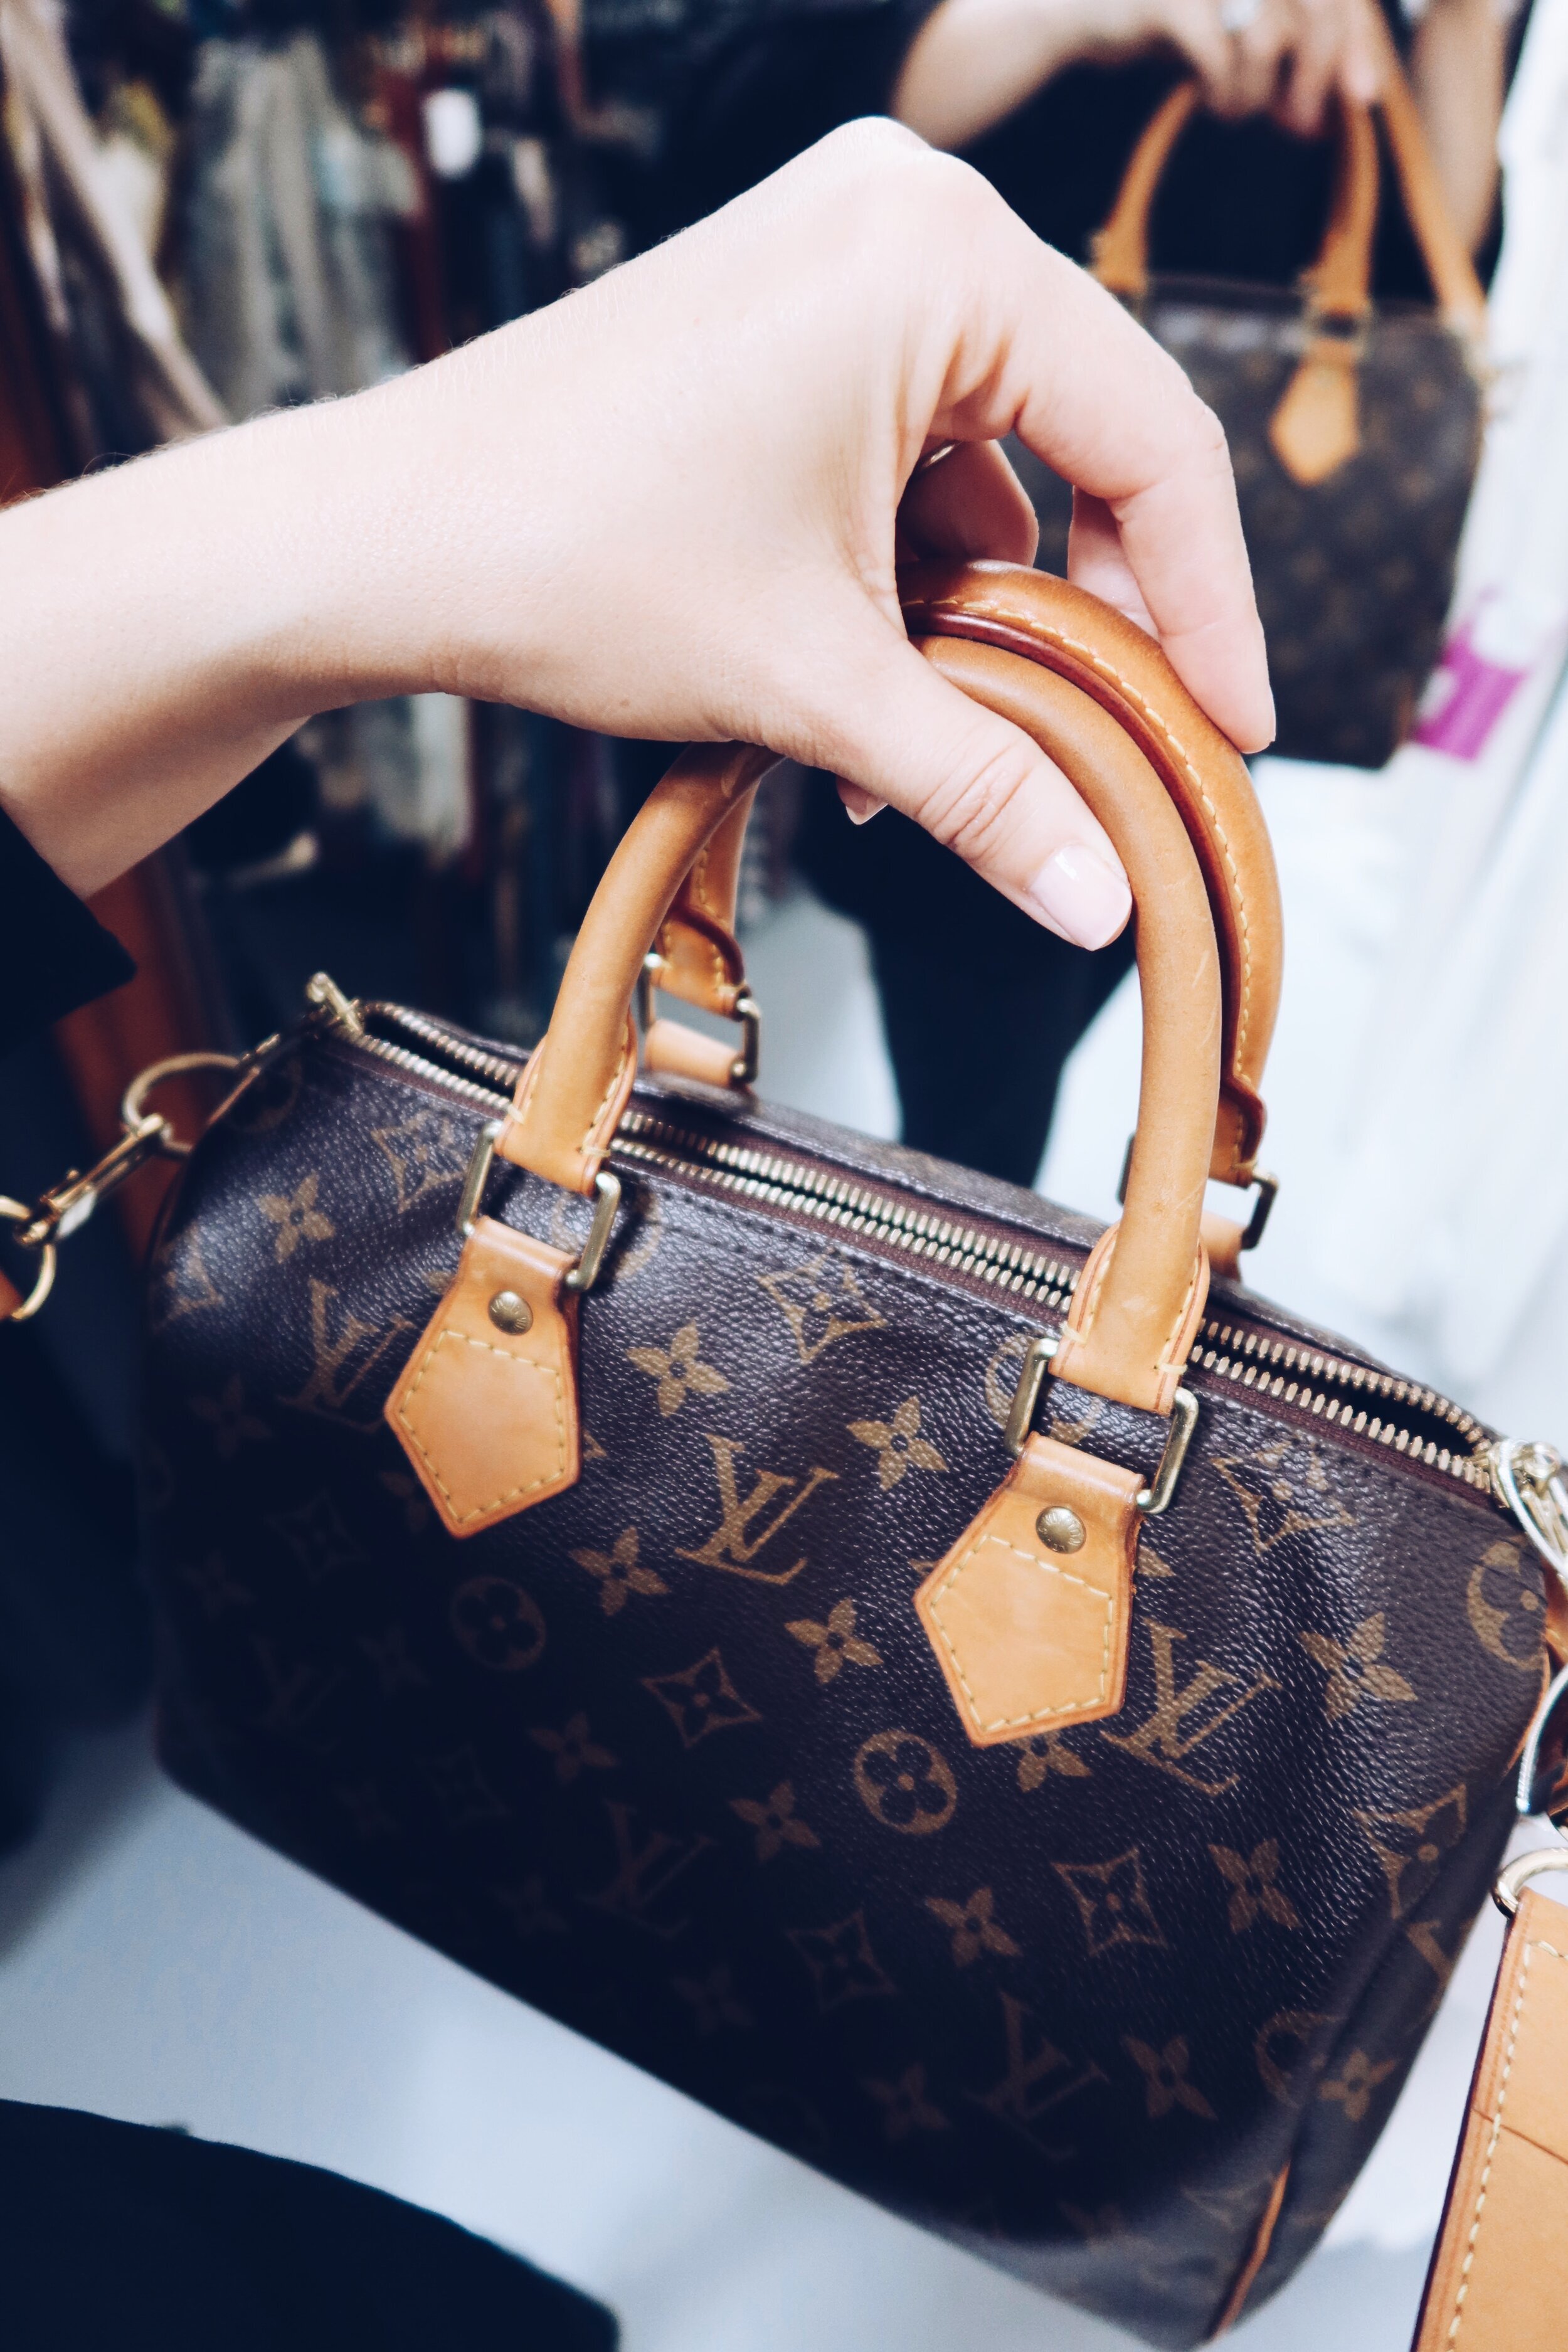 Tips for Buying Second Hand Designer Handbags - Article & Review Writer